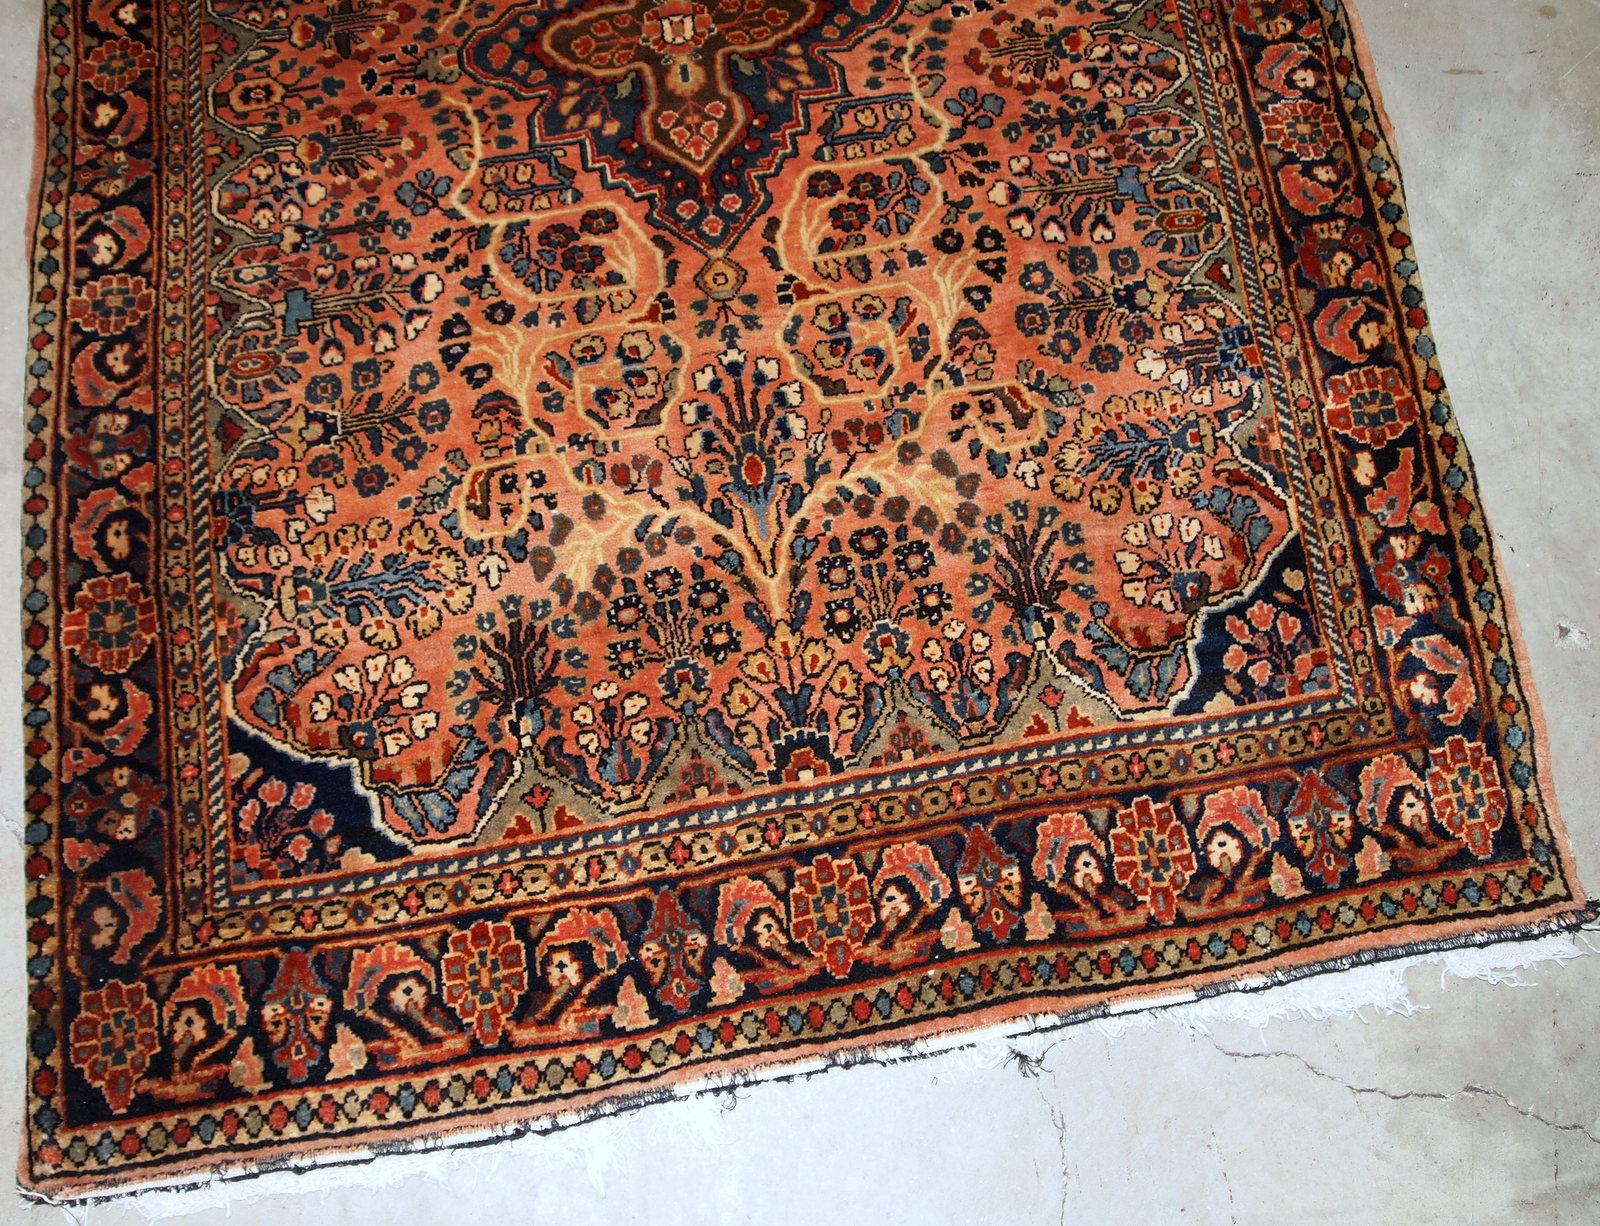 1920s style rugs